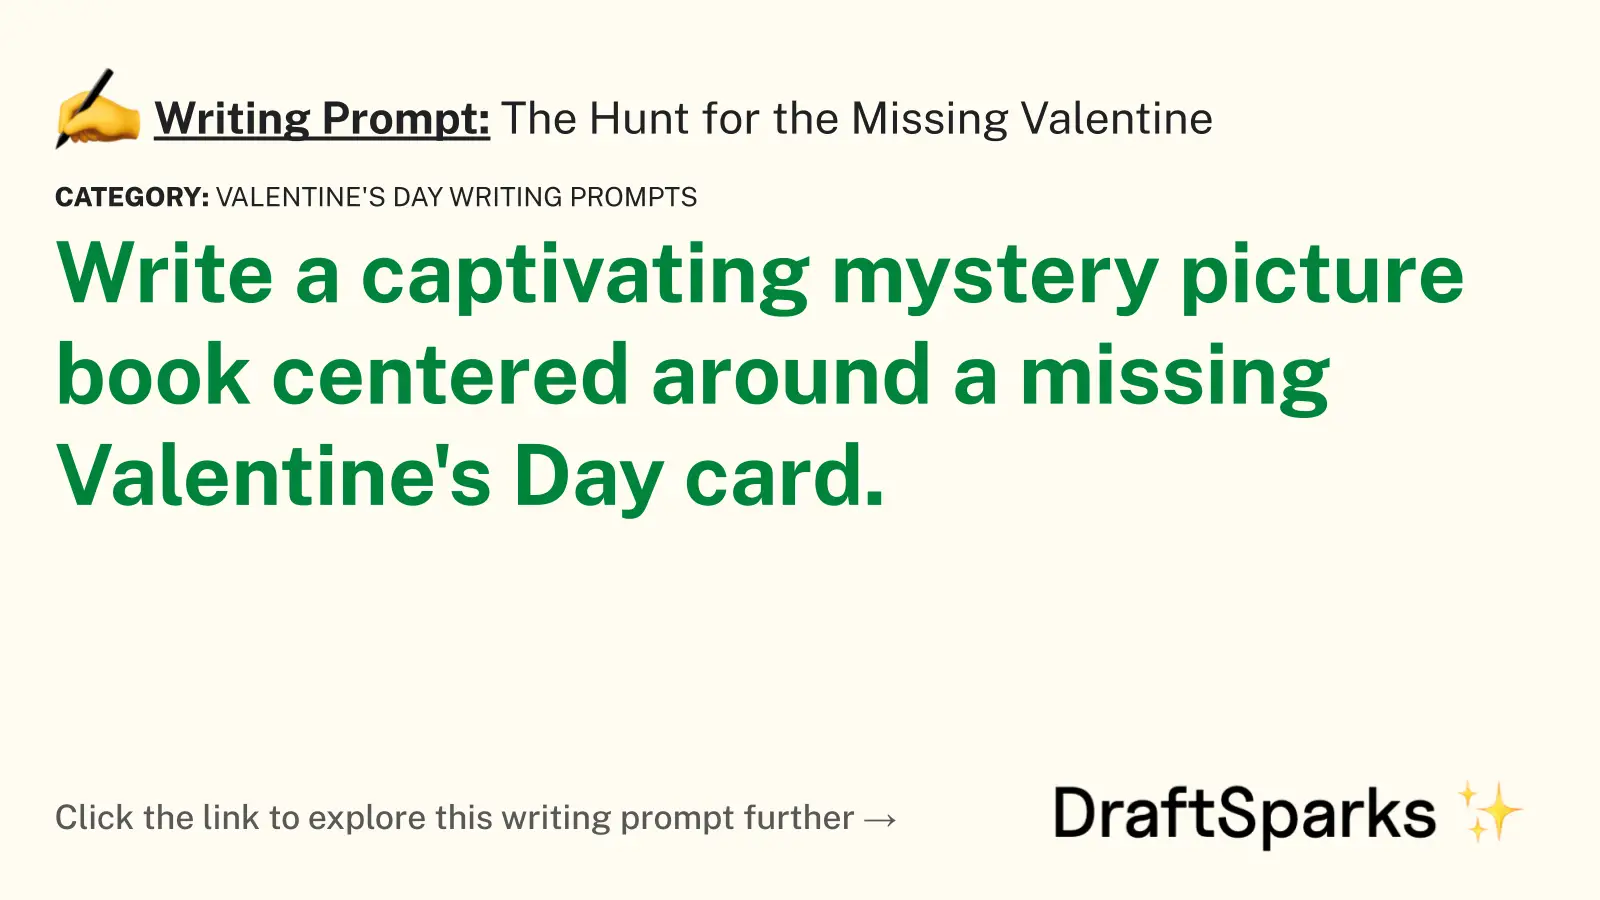 The Hunt for the Missing Valentine